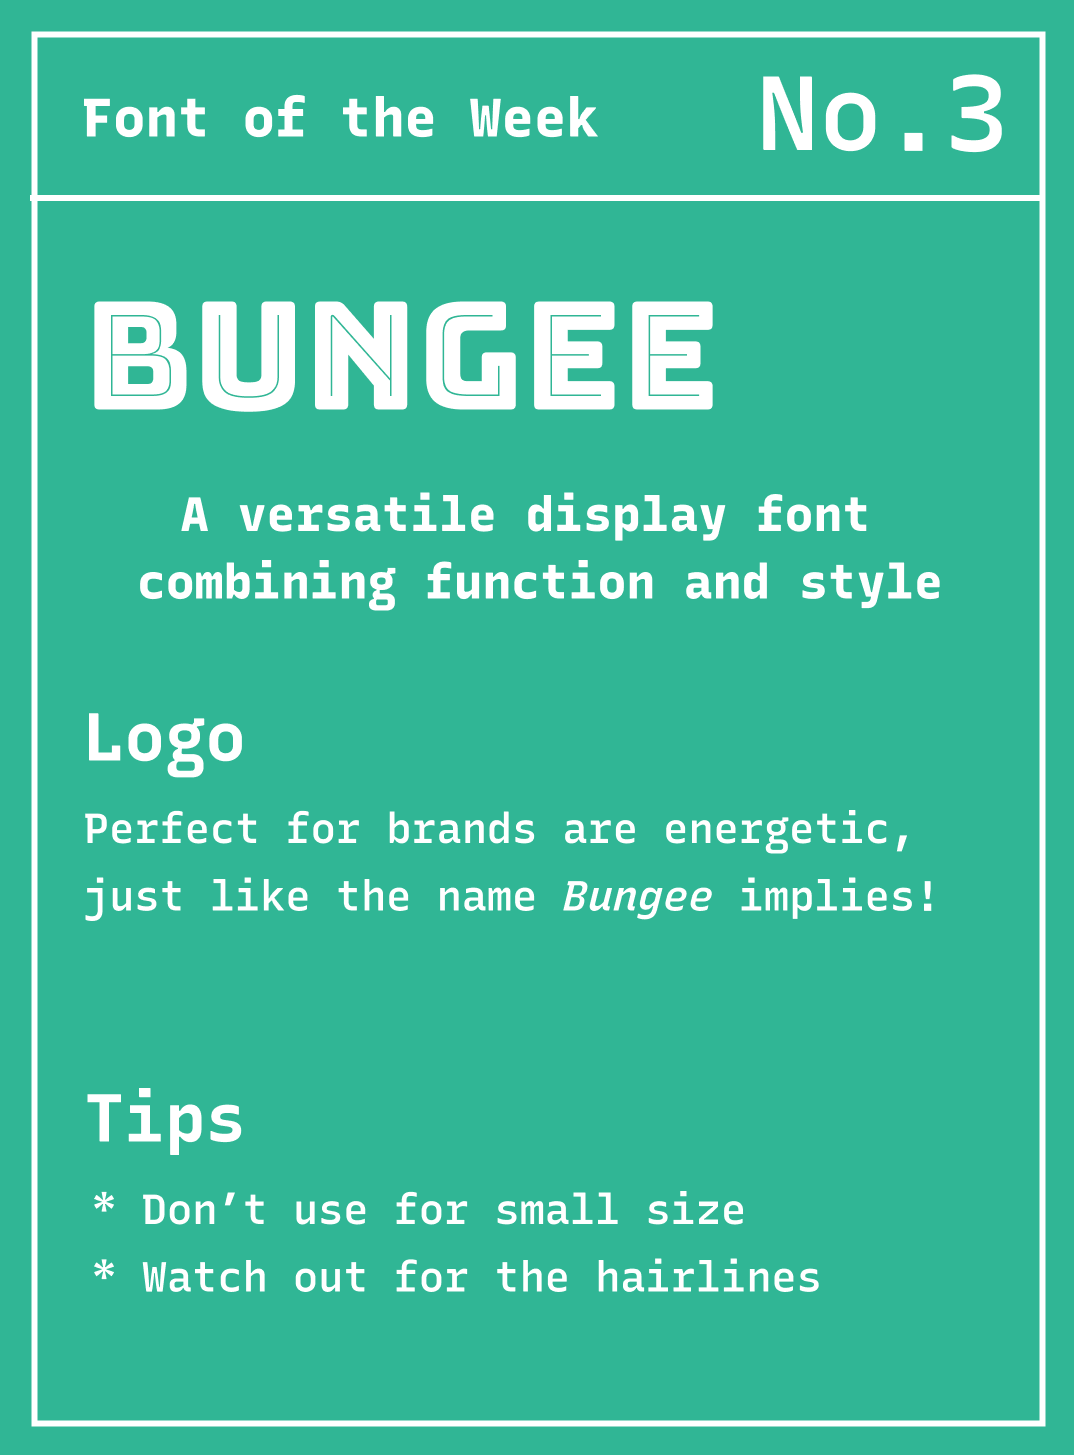 [Quick infographic about Bungee]